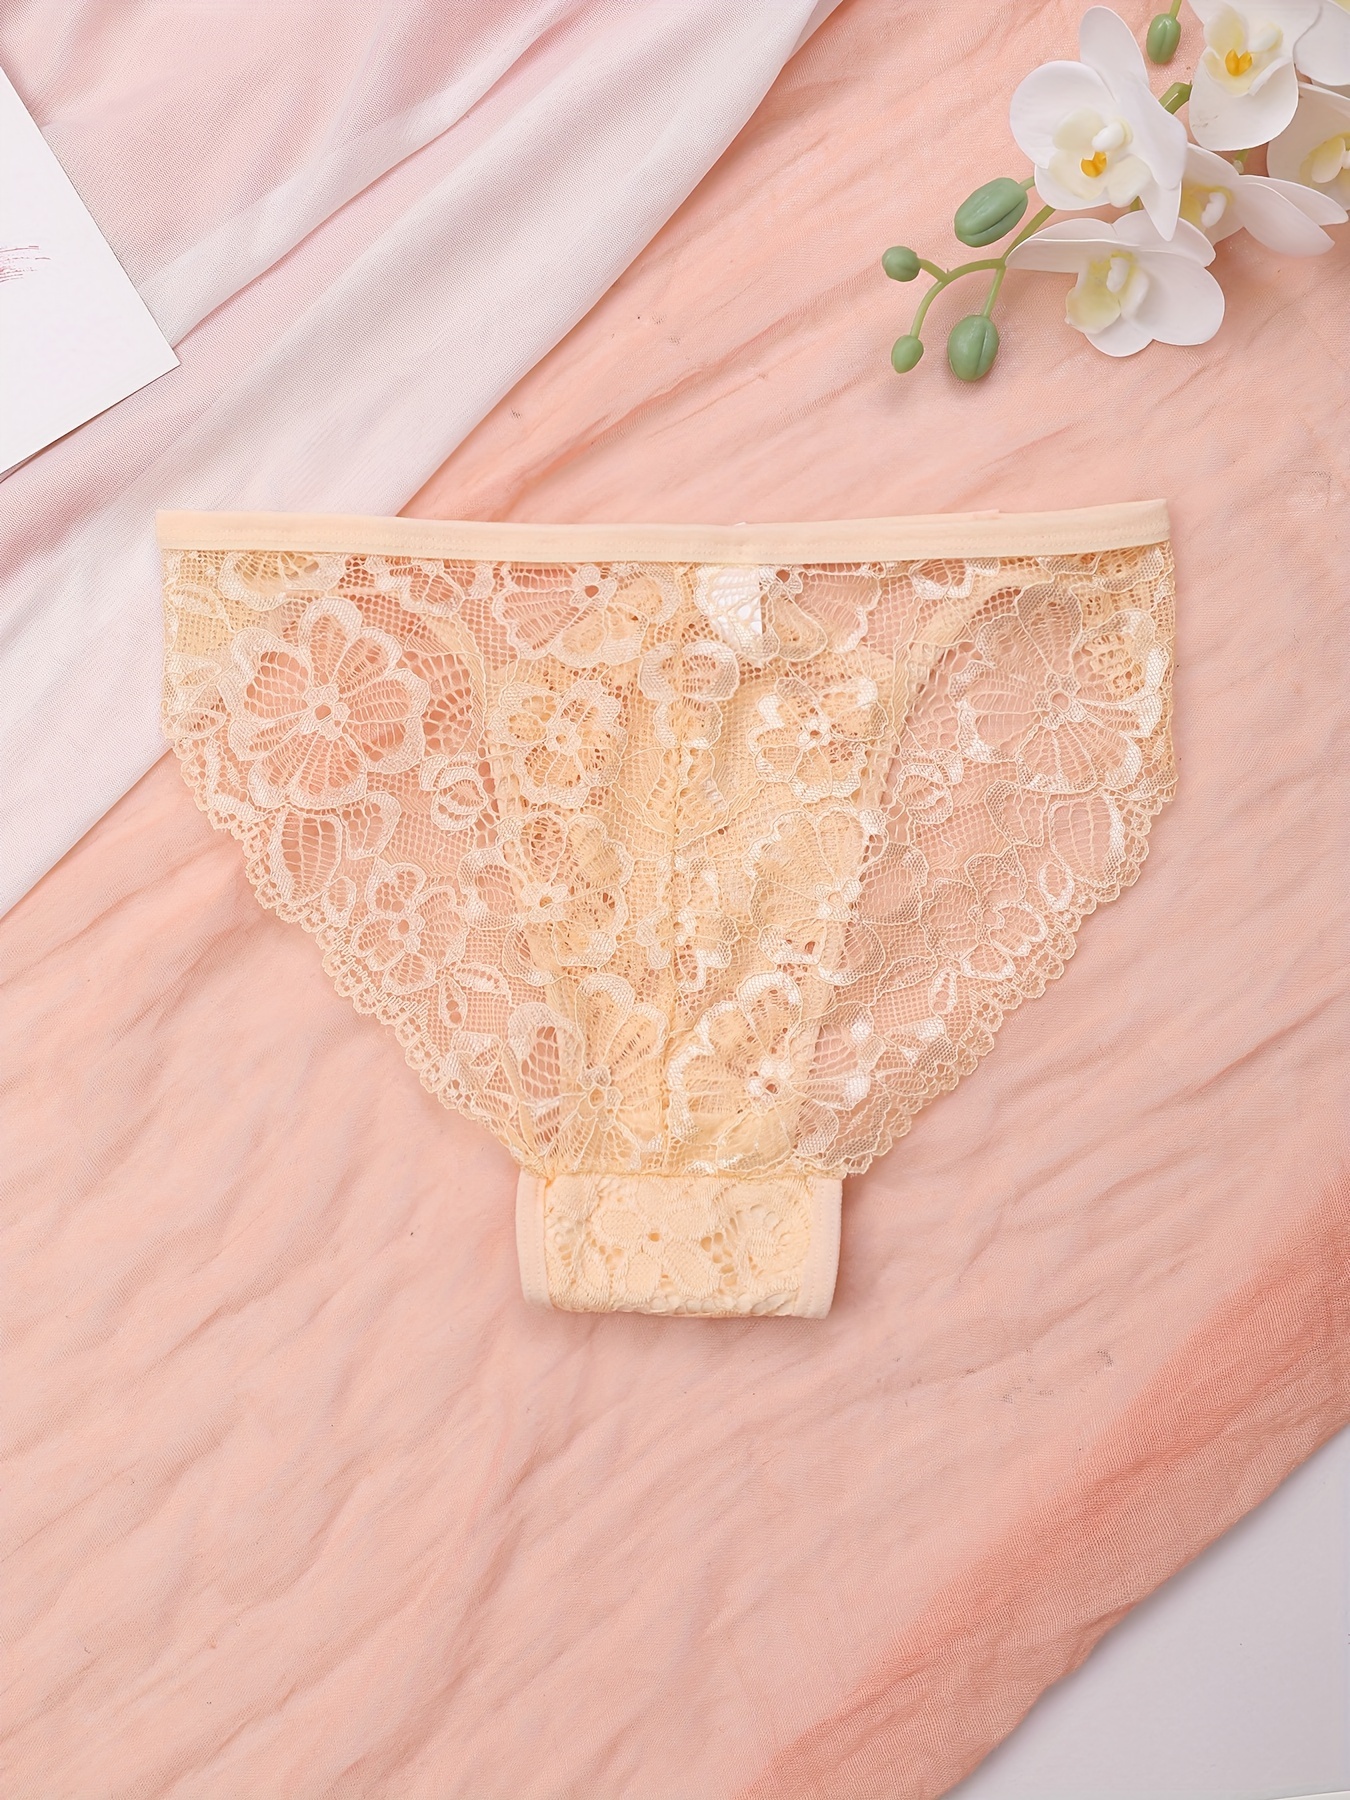 Women Cotton Blend Hispster Baby Pink Color Panty